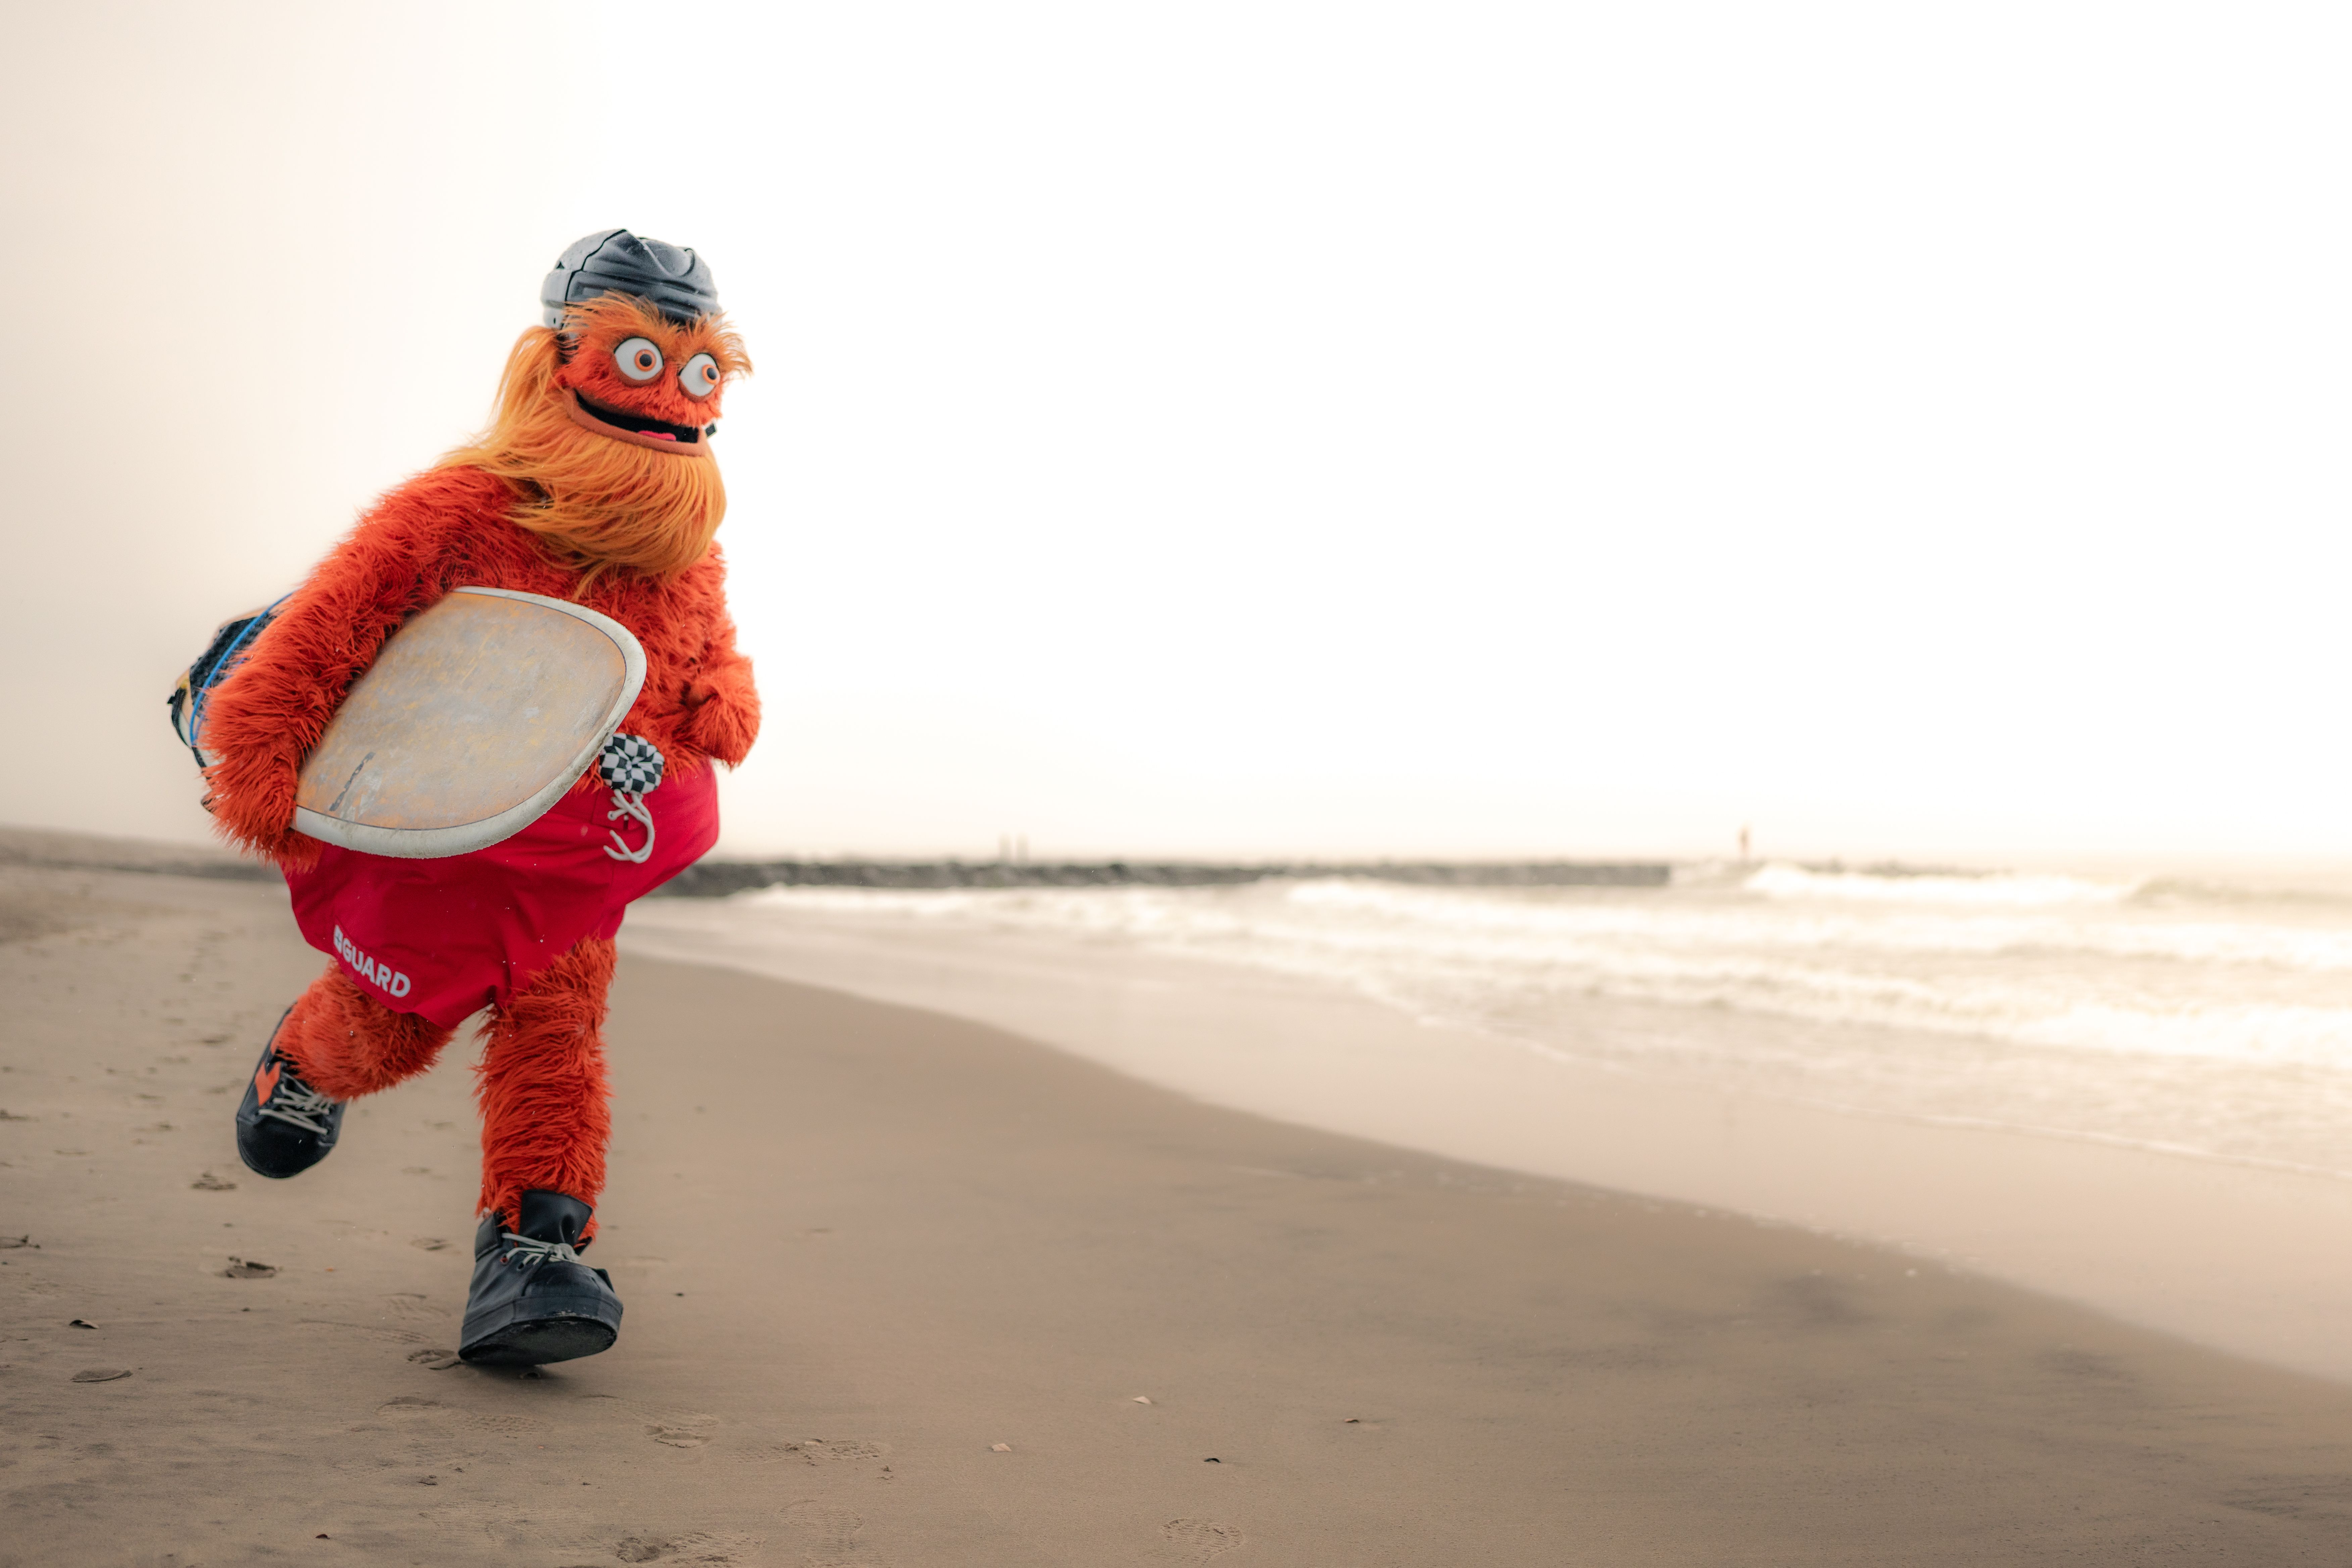 Gritty holding a surfboard while running on a beach. 